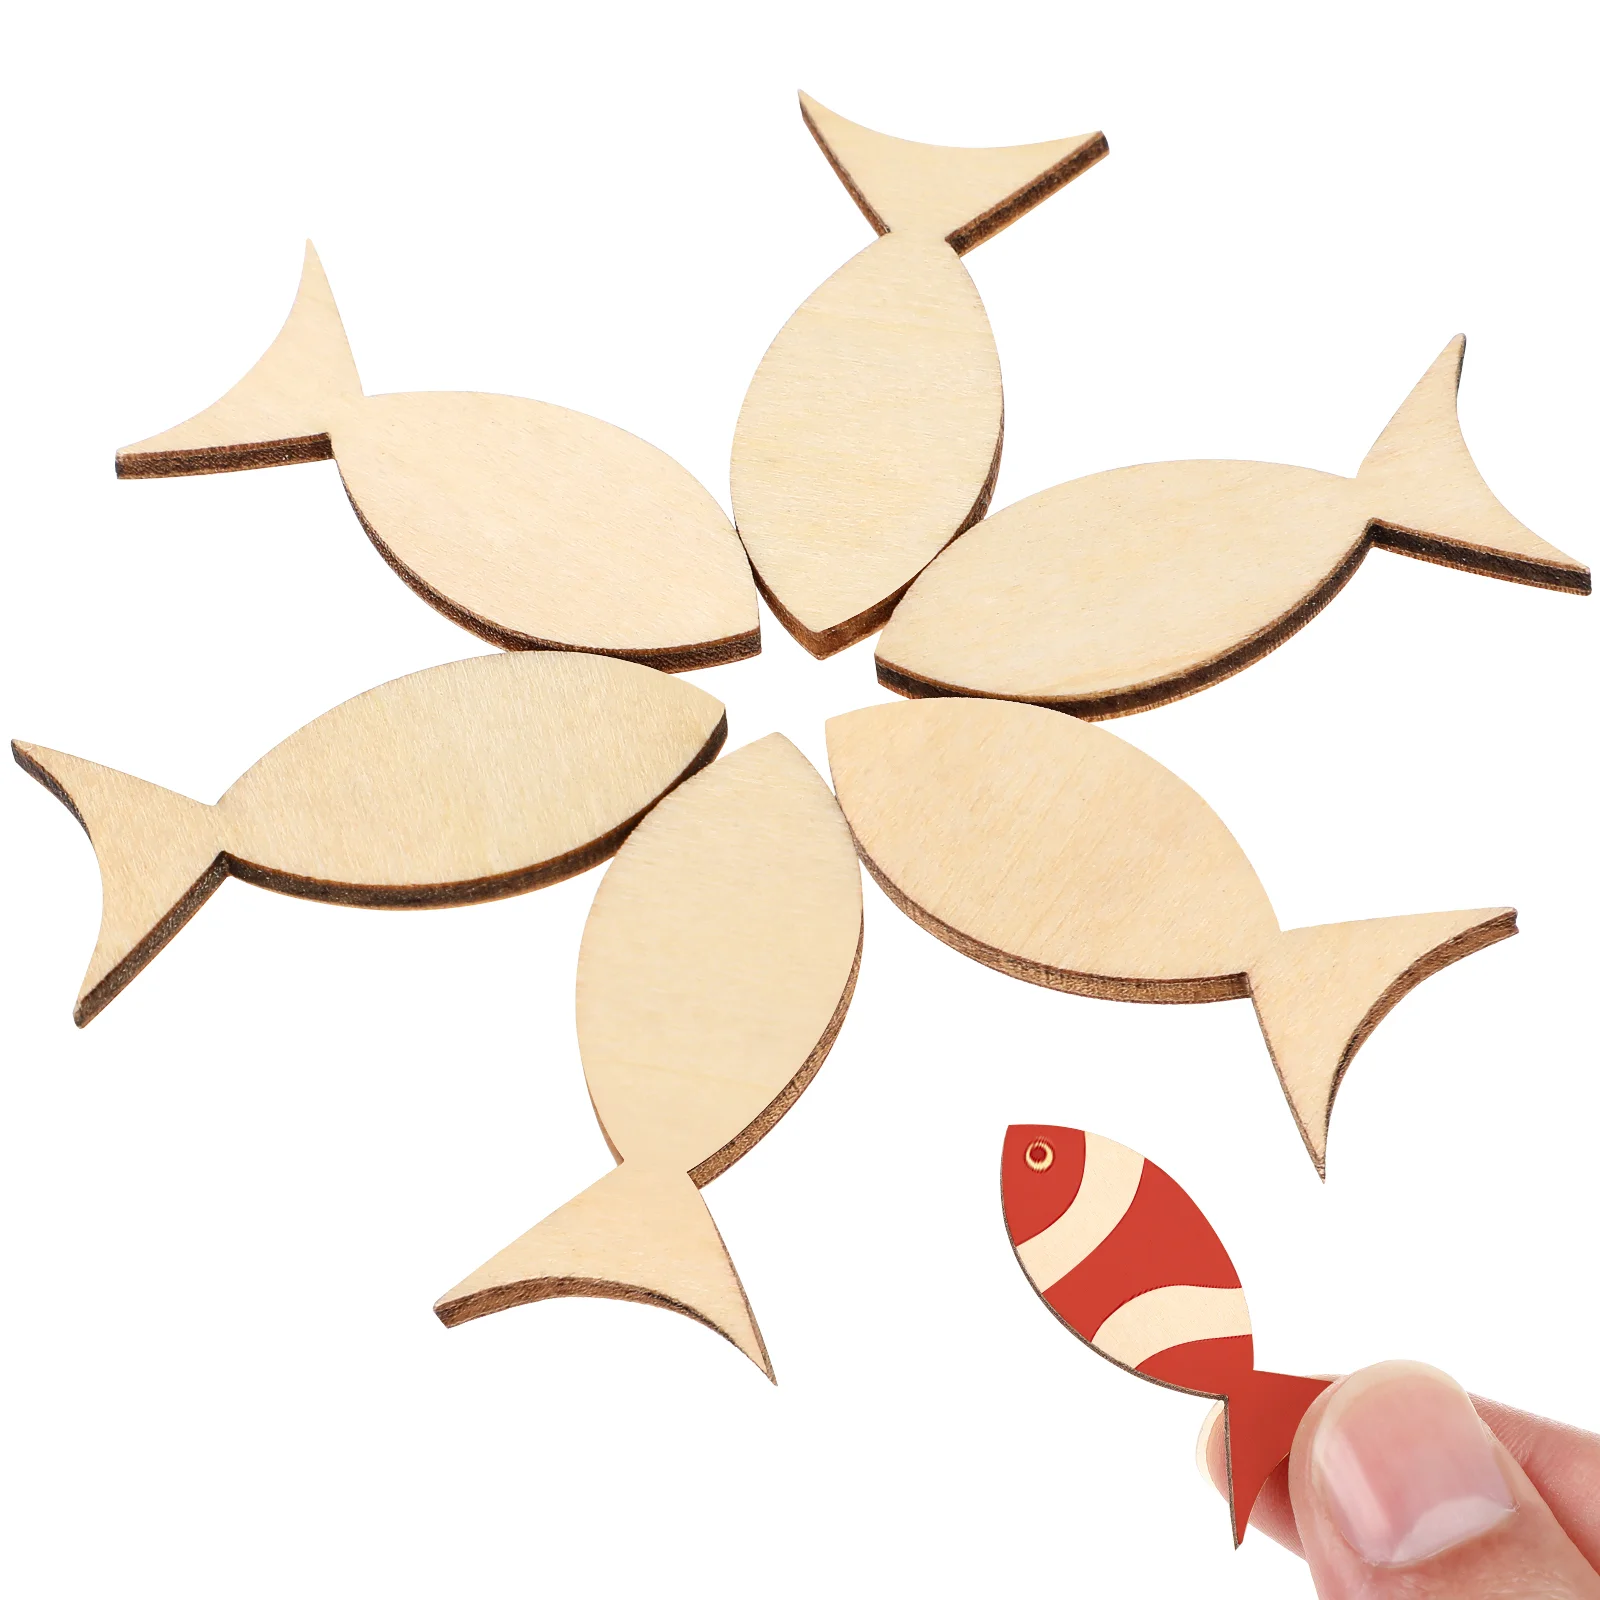 

100 Pcs Wood Trim Wooden Gift Tags Craft Chip Embellishments Unfinished Slices Shapes Crafting Ship Ornaments